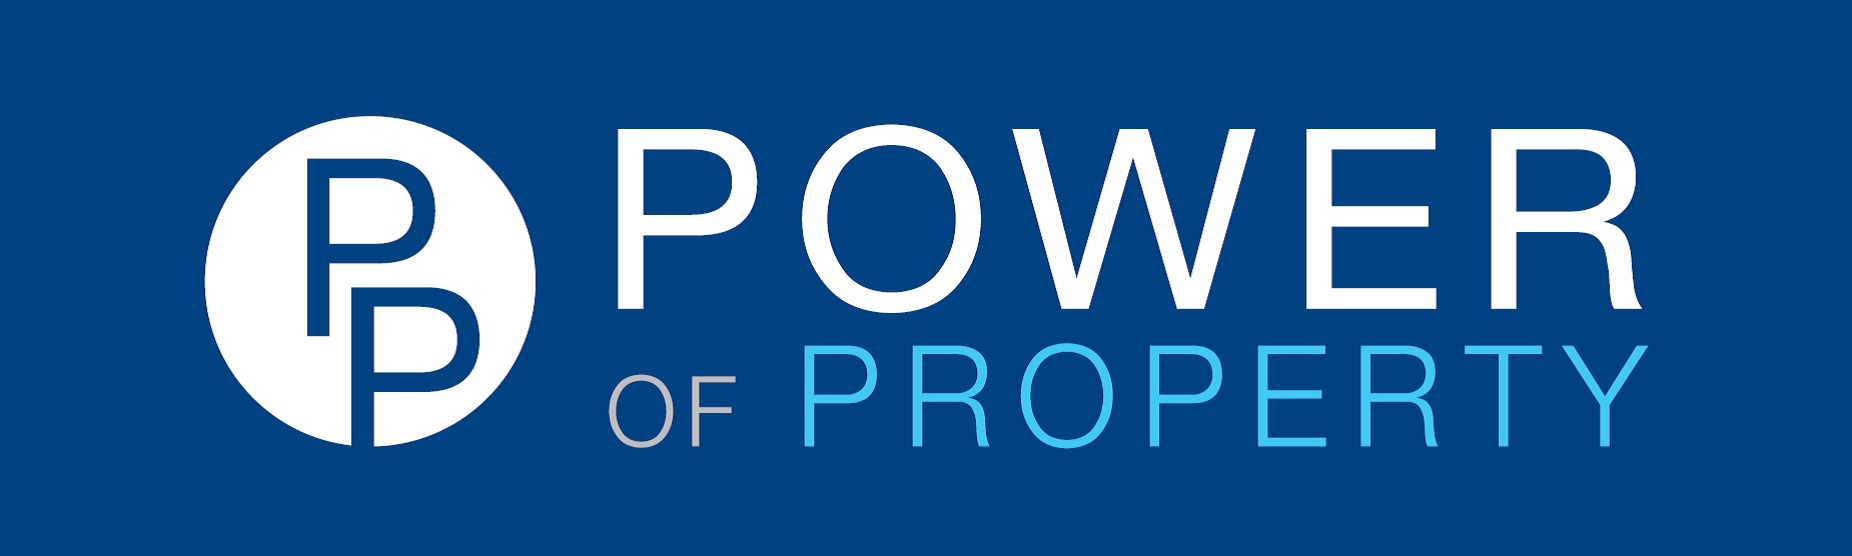 Power Of Property logo blue.png